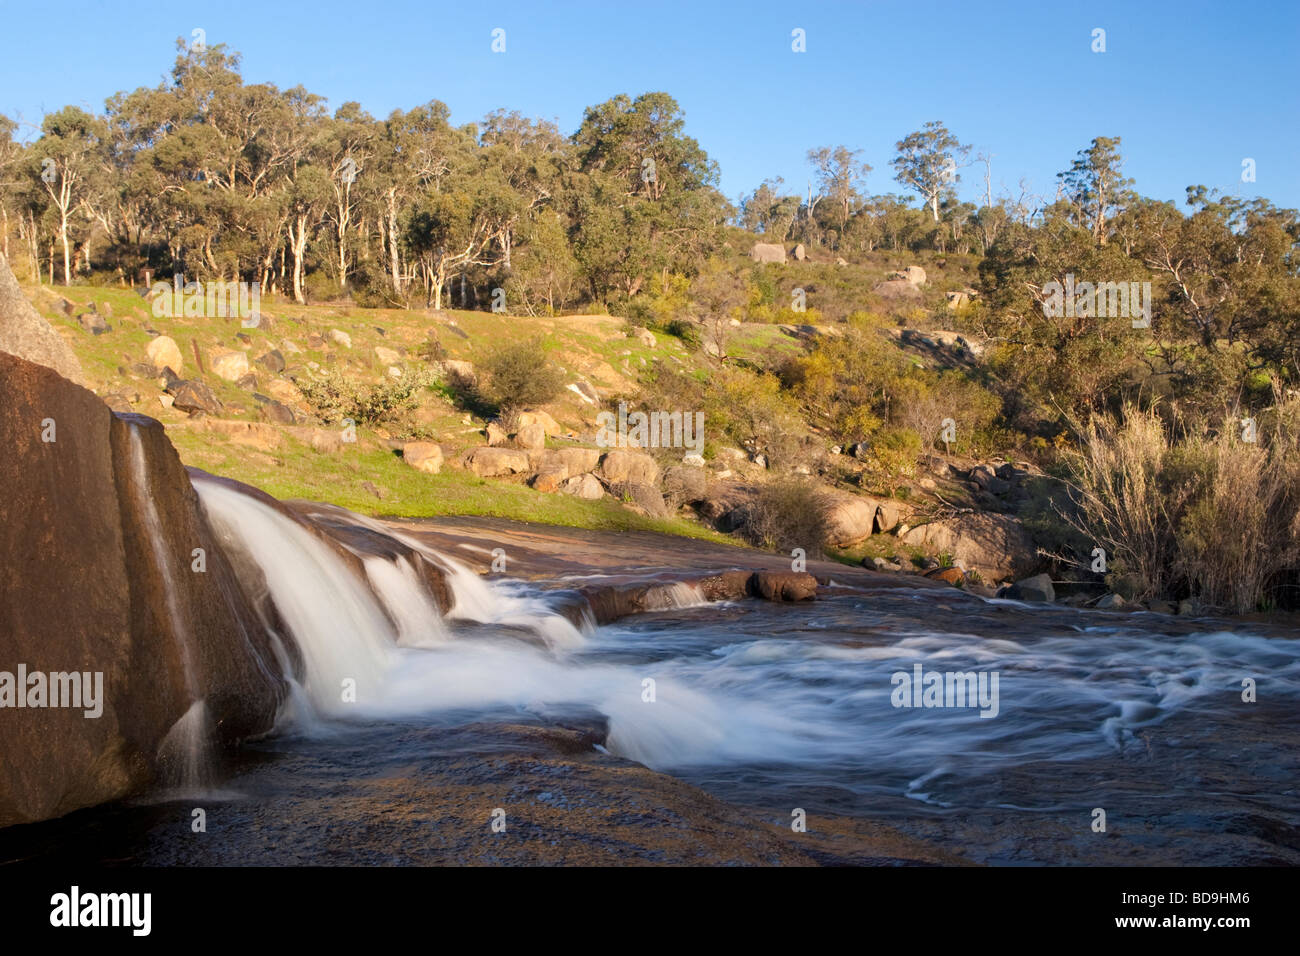 Jane Broook flowing over Hovea Falls in John Forrest National Park, Perth, Western Australia Stock Photo